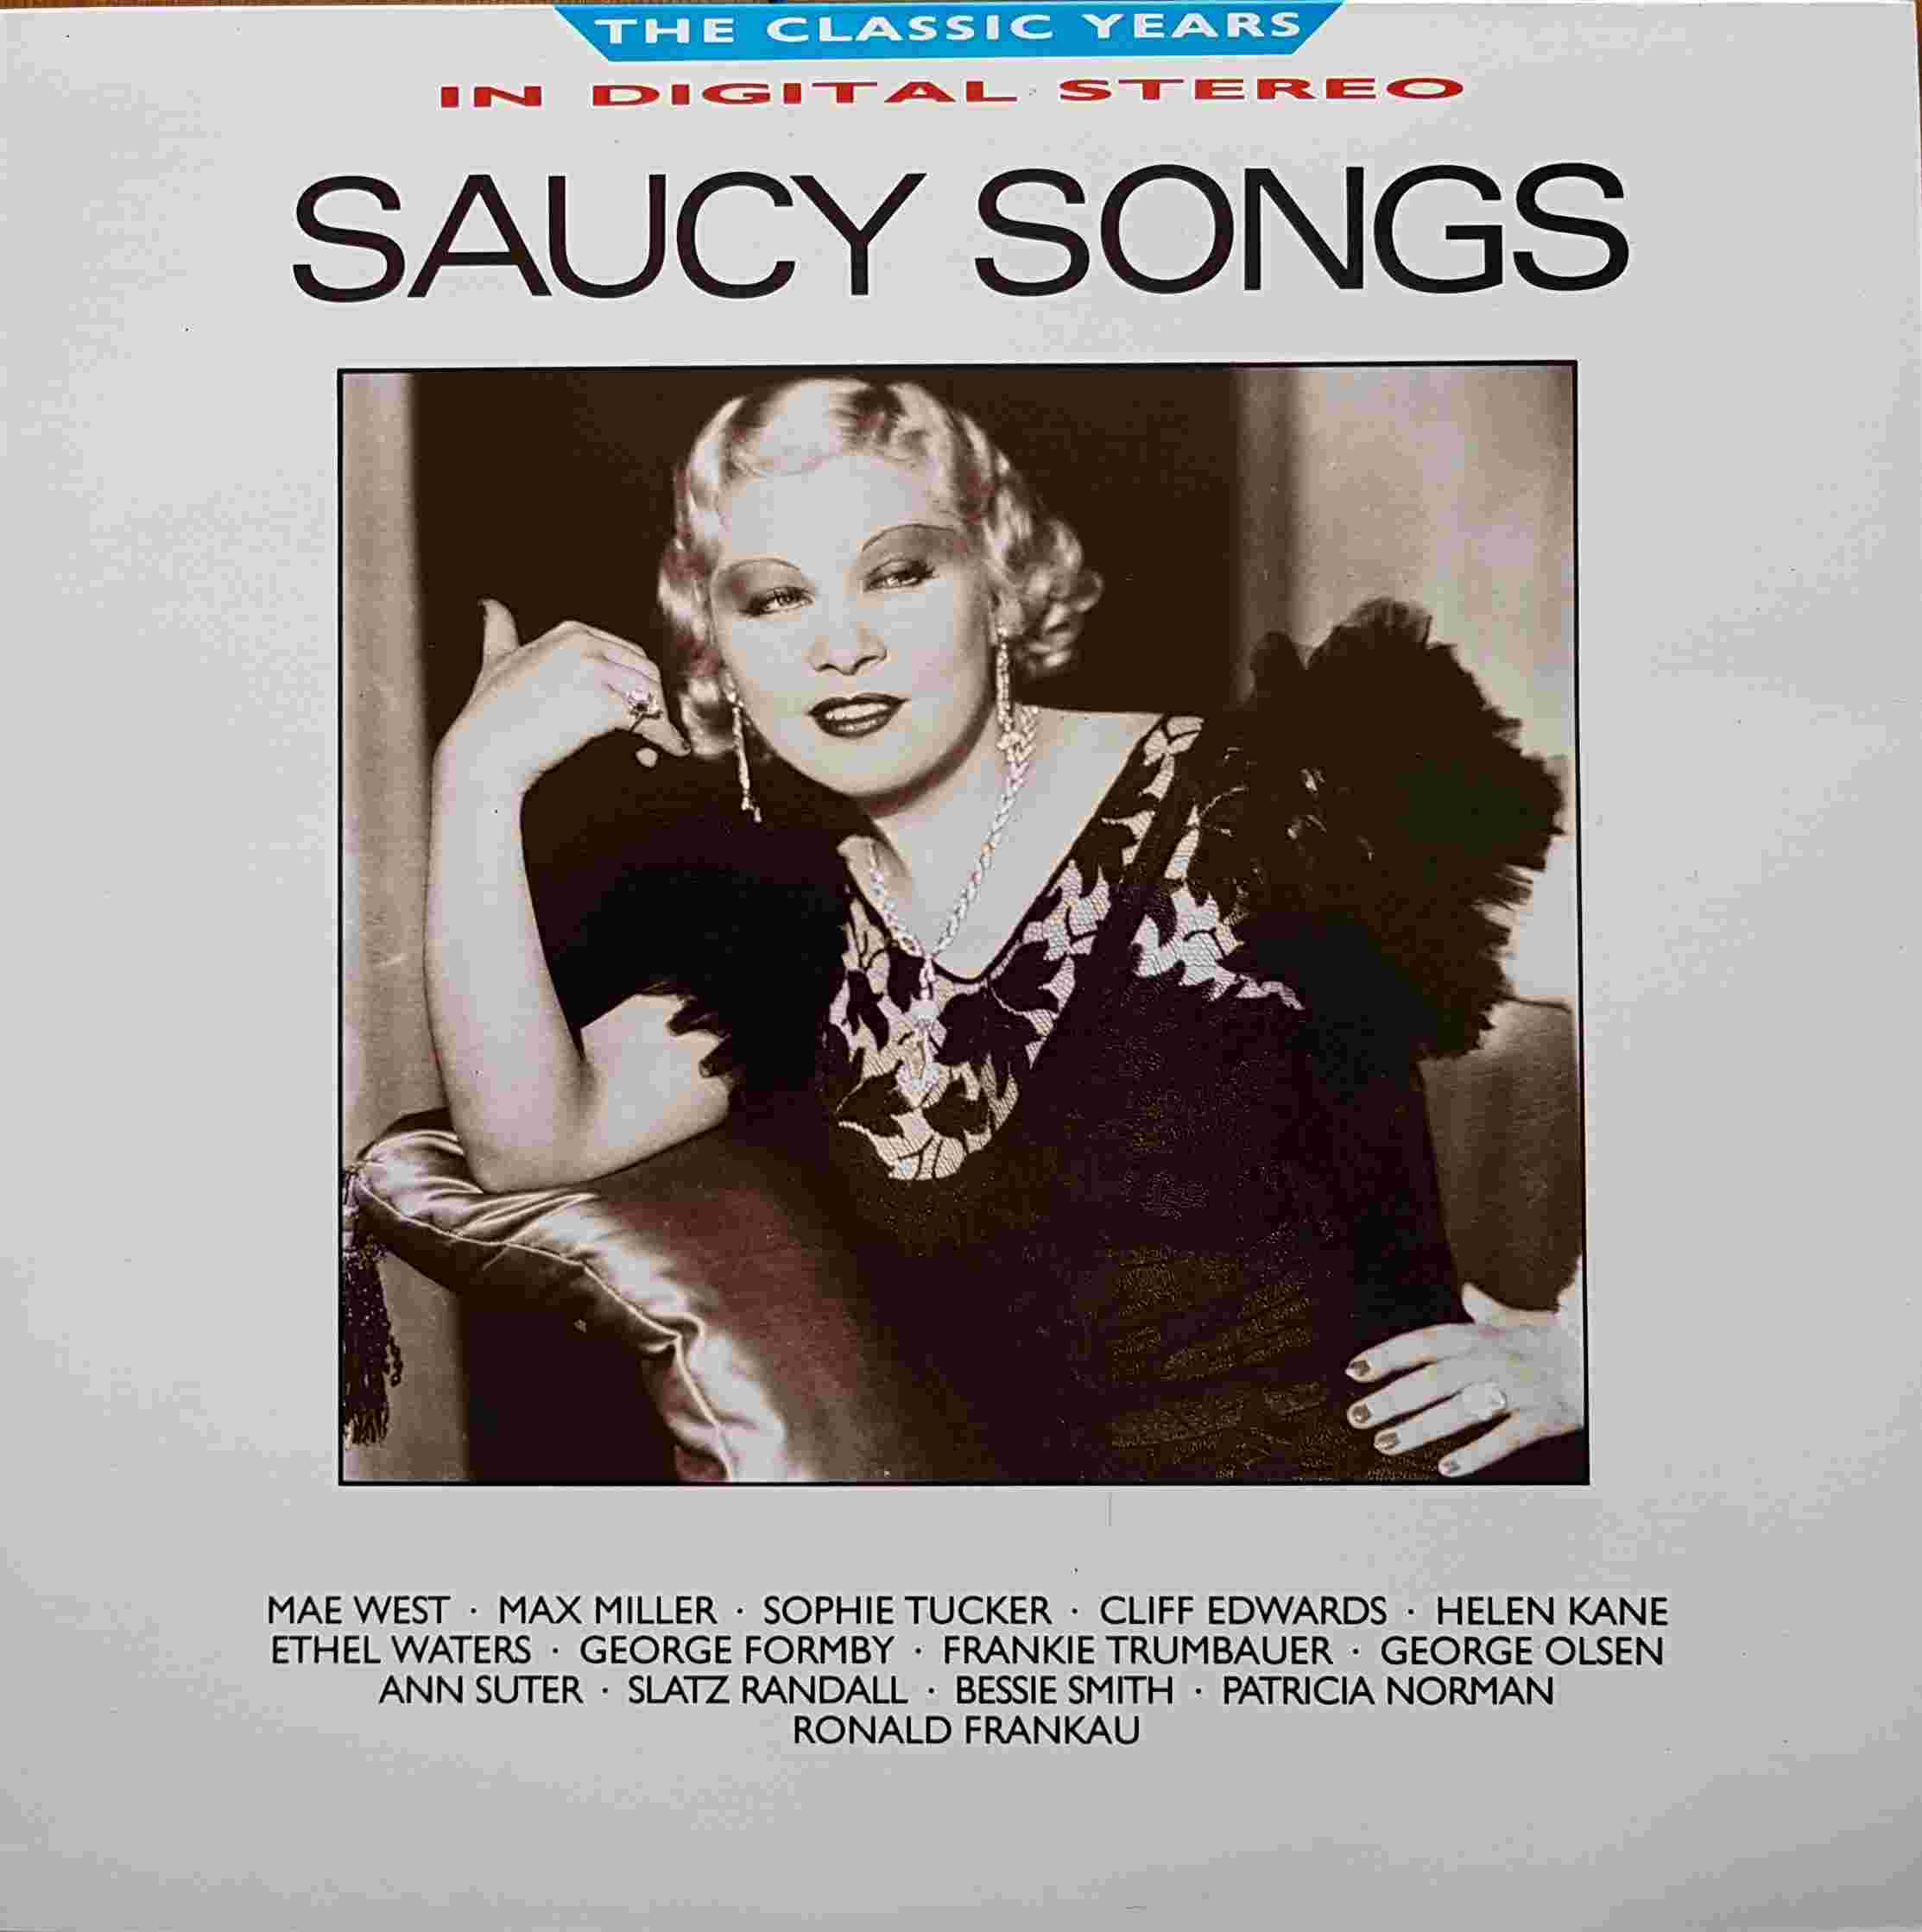 Picture of REB 728 Classic years - Saucy songs by artist Various from the BBC albums - Records and Tapes library